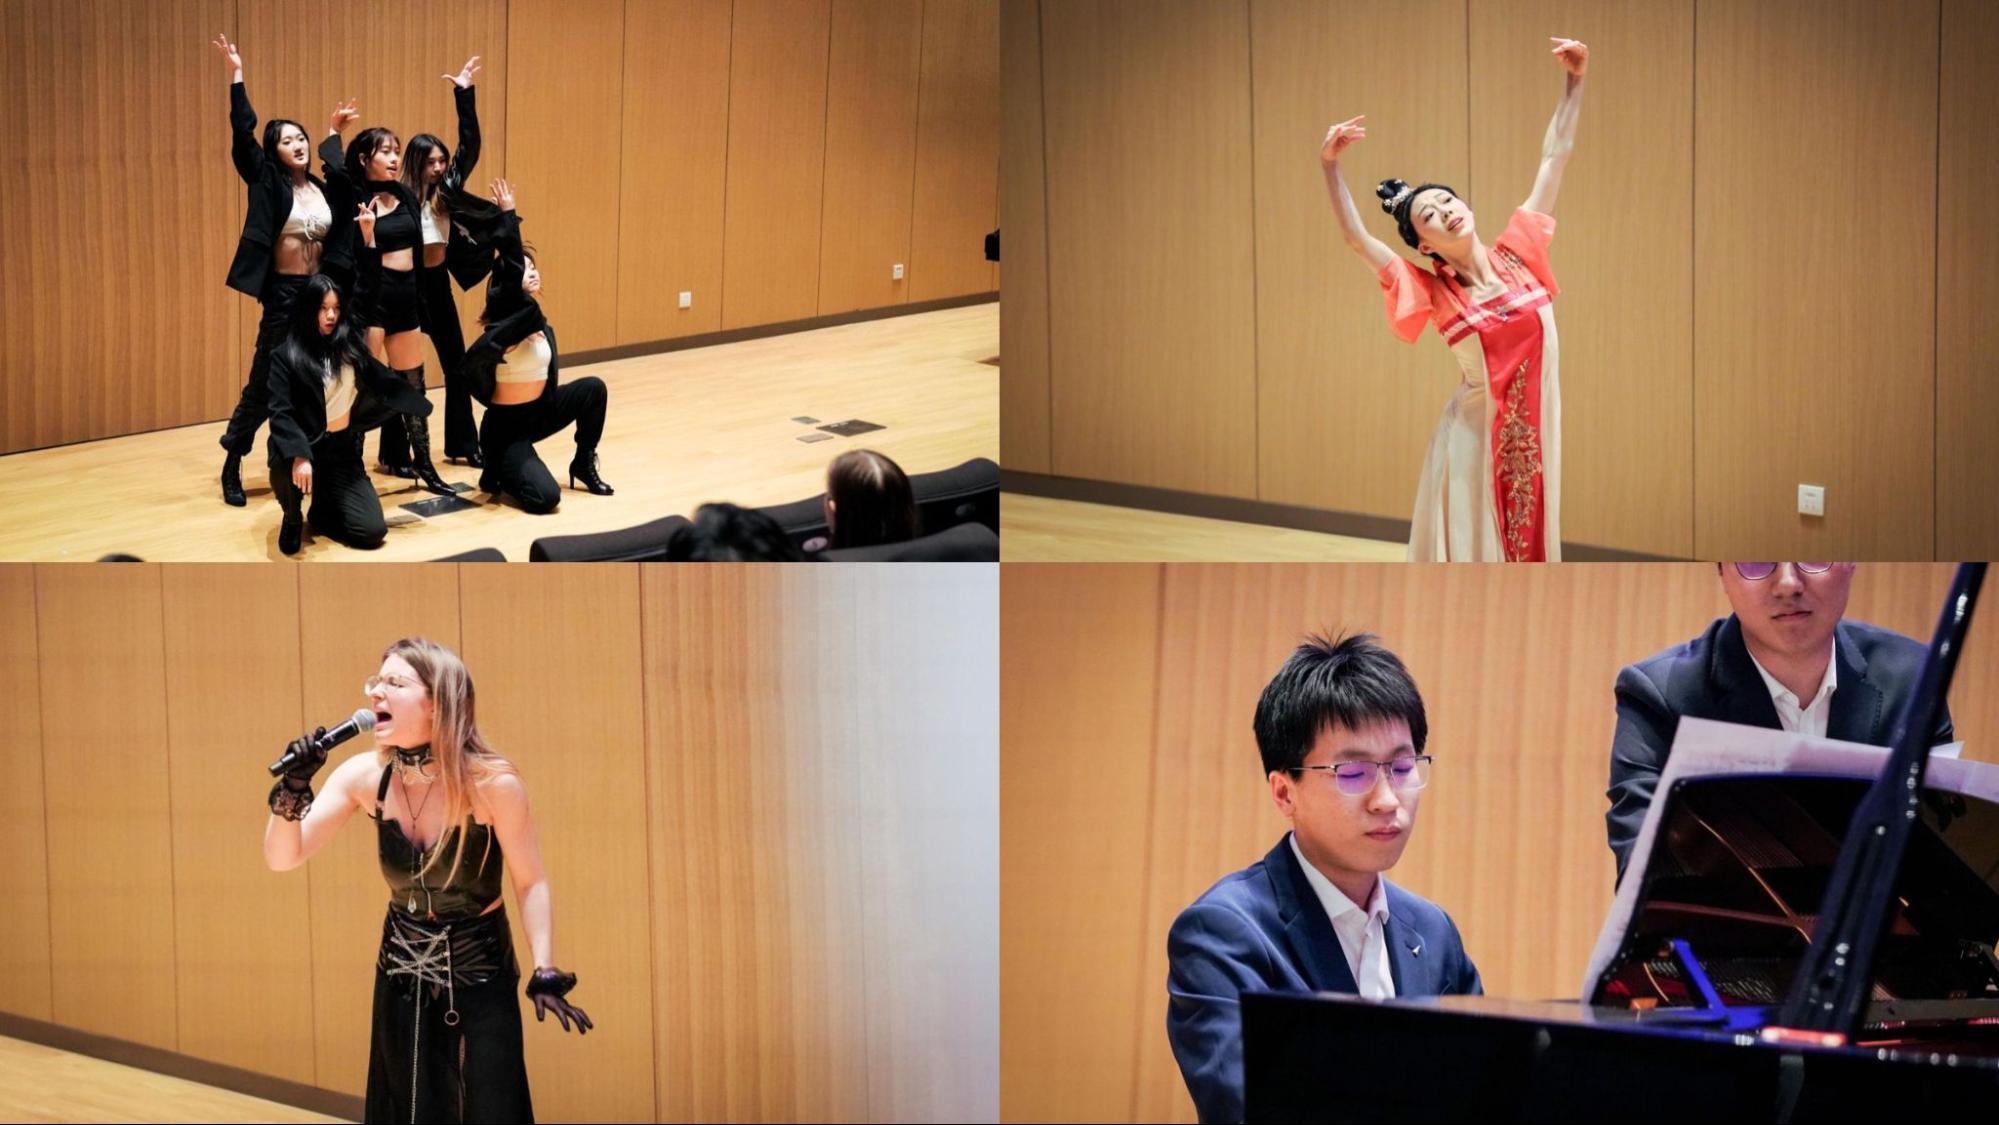 photos of four of the performers including kpop, traditional chinese dance, piano, and singers.